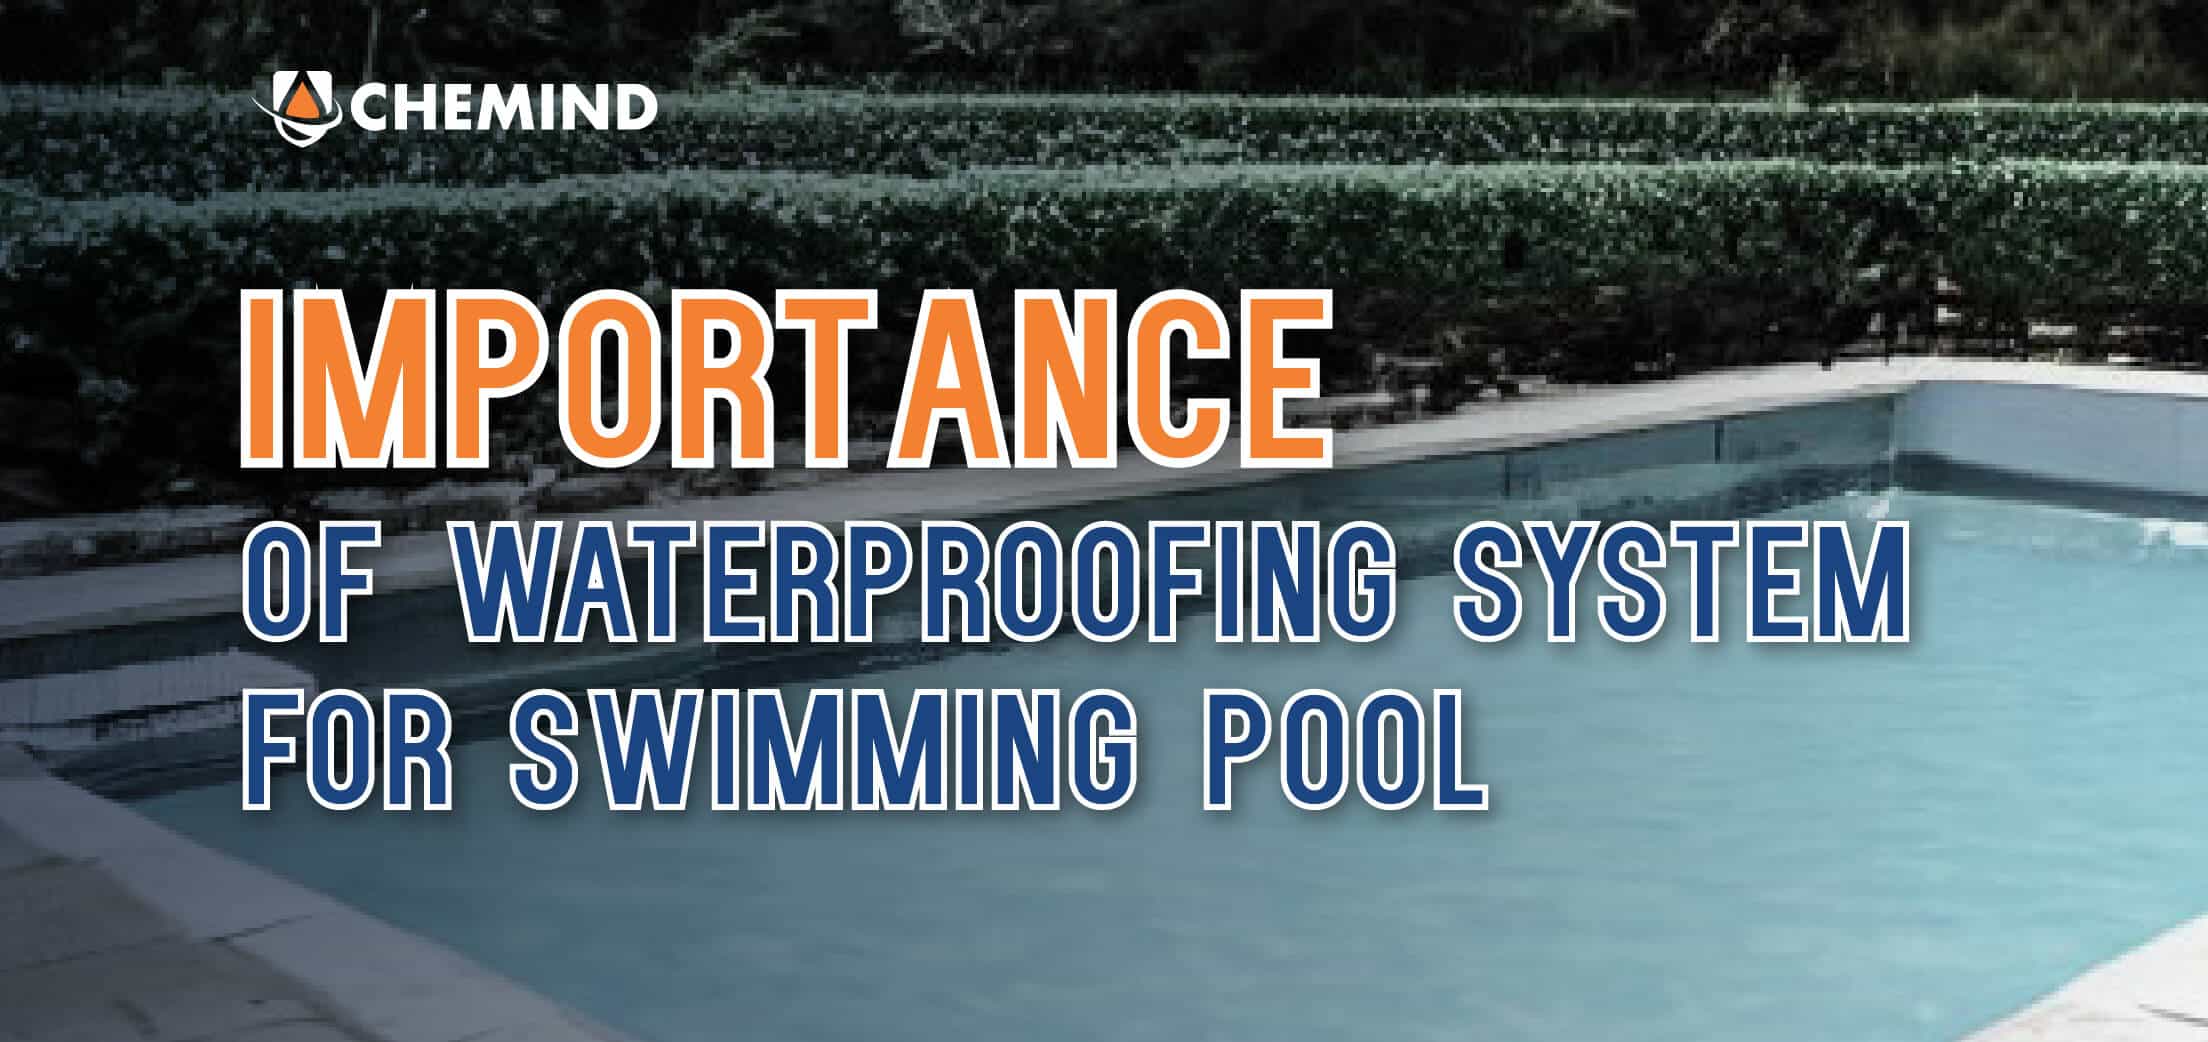 Waterproofing system for swimming pool